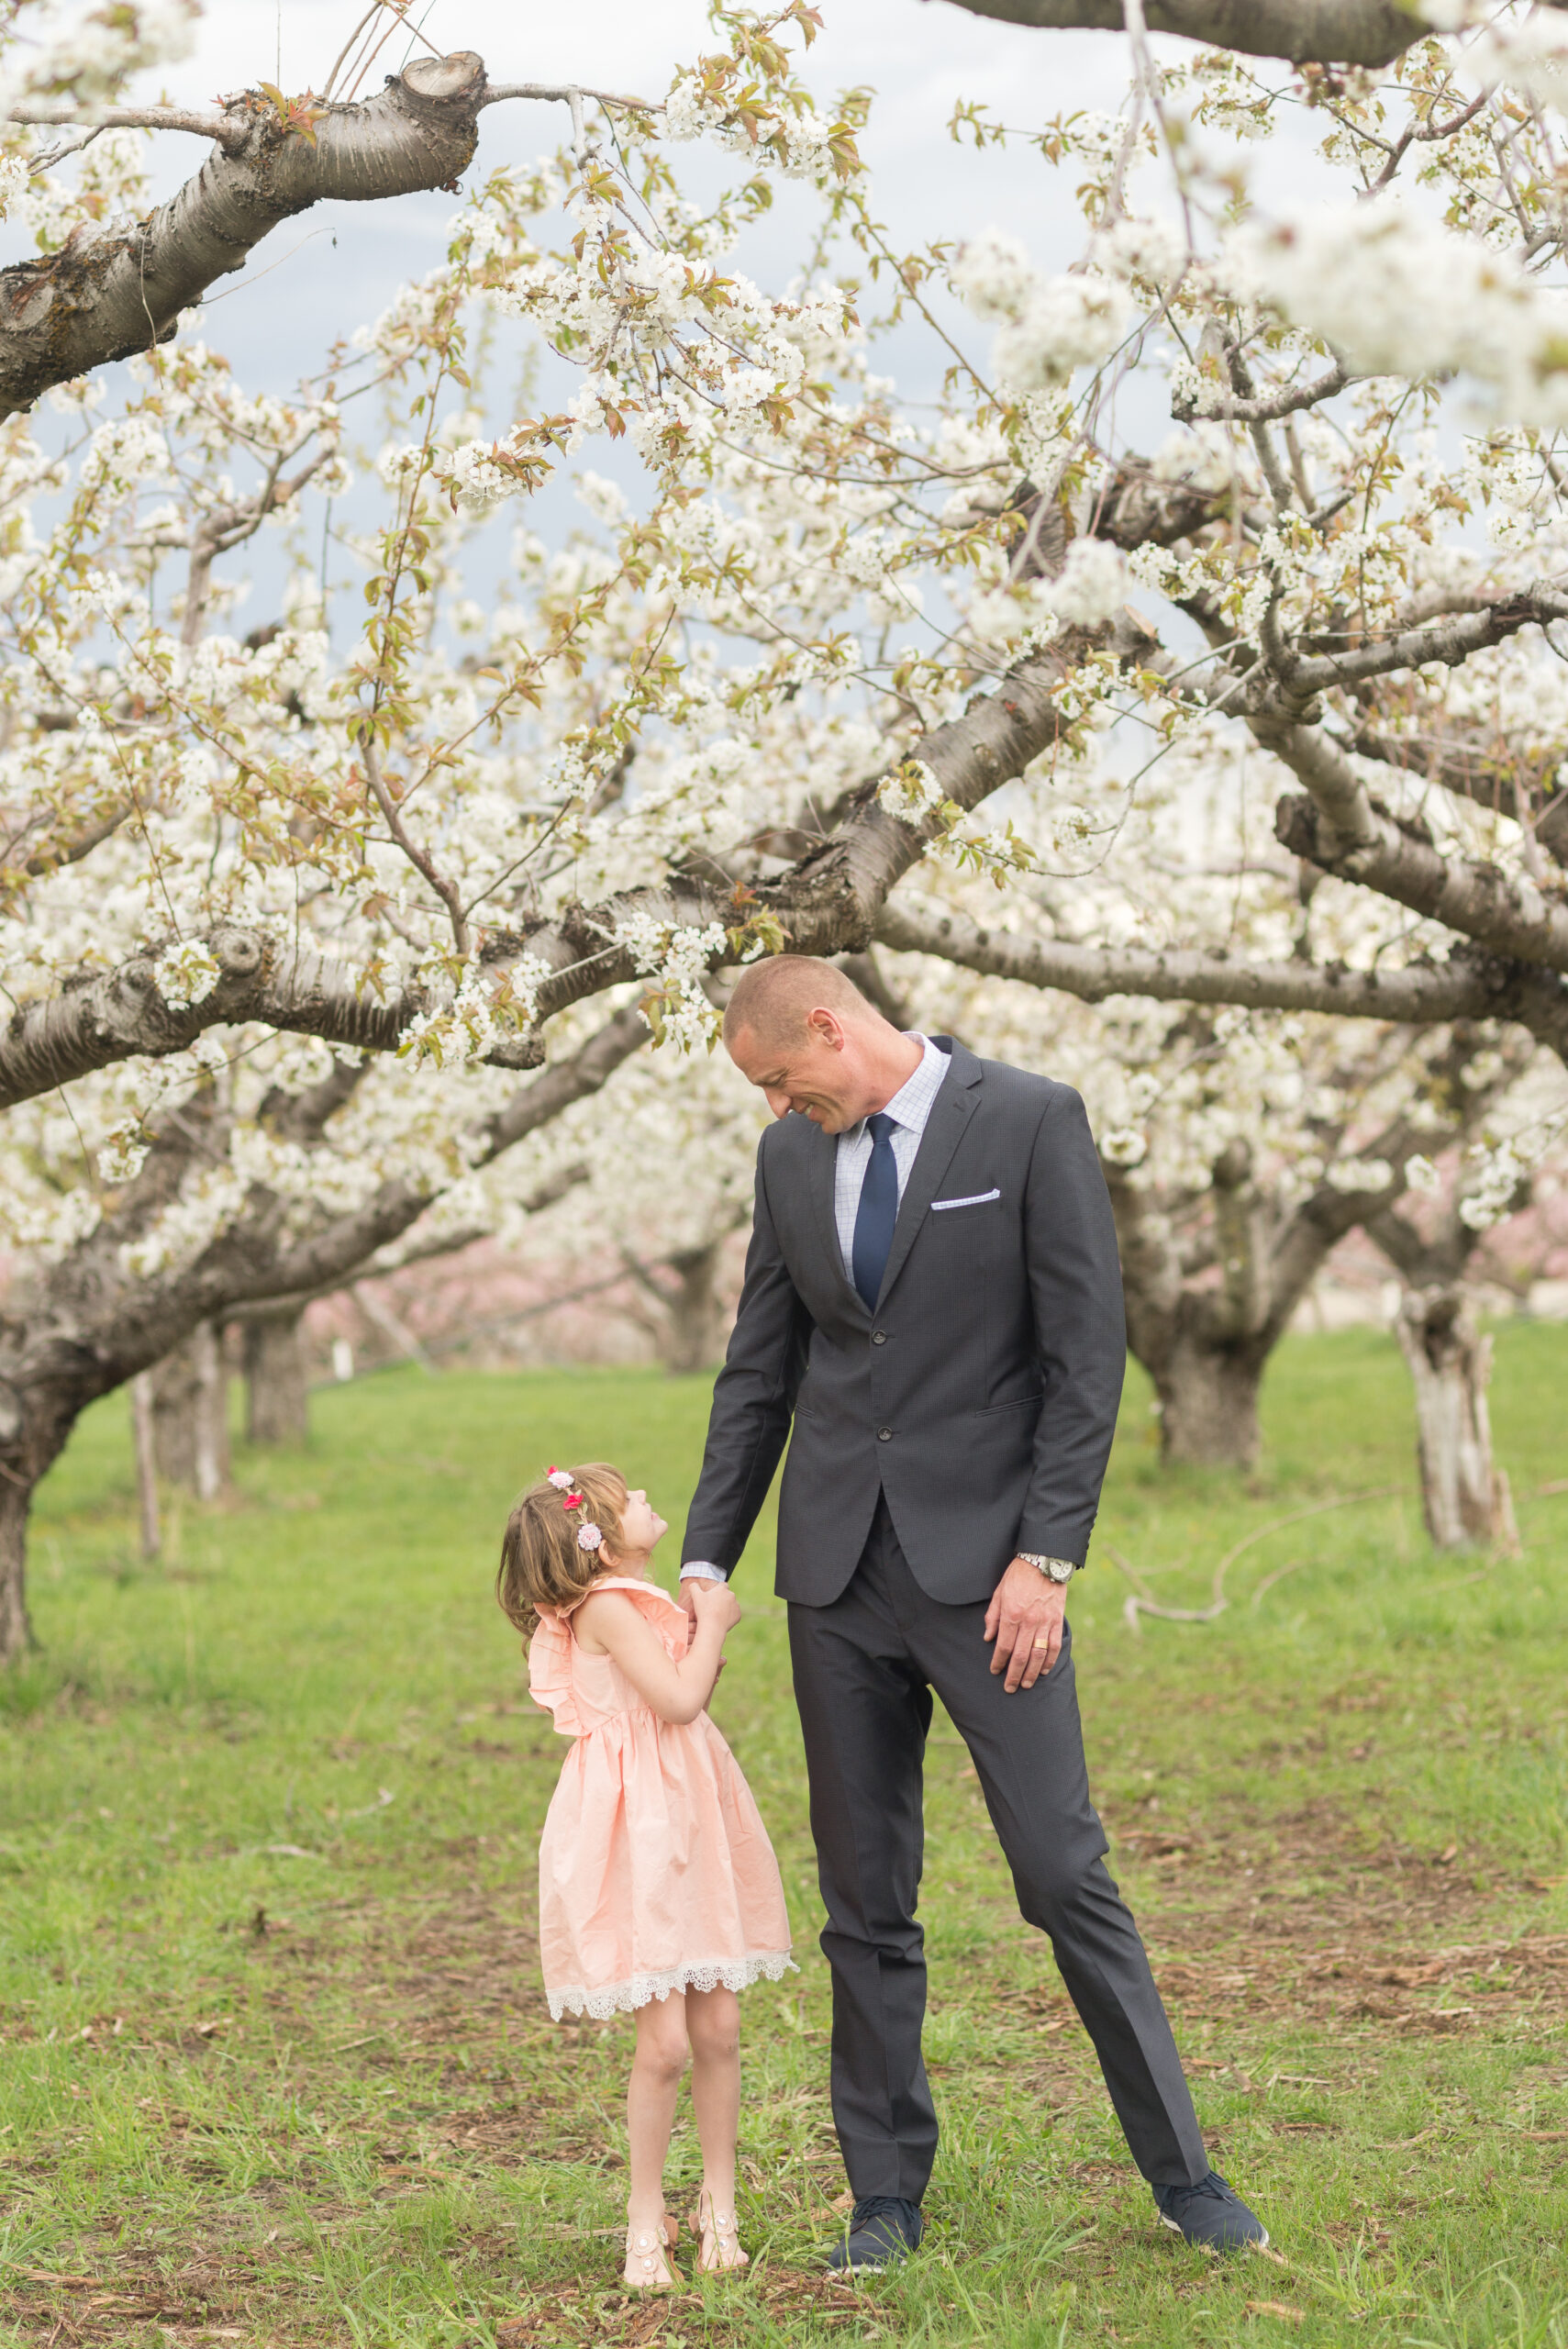 Gorgeous dad and daughter moment at the Manning Orchard